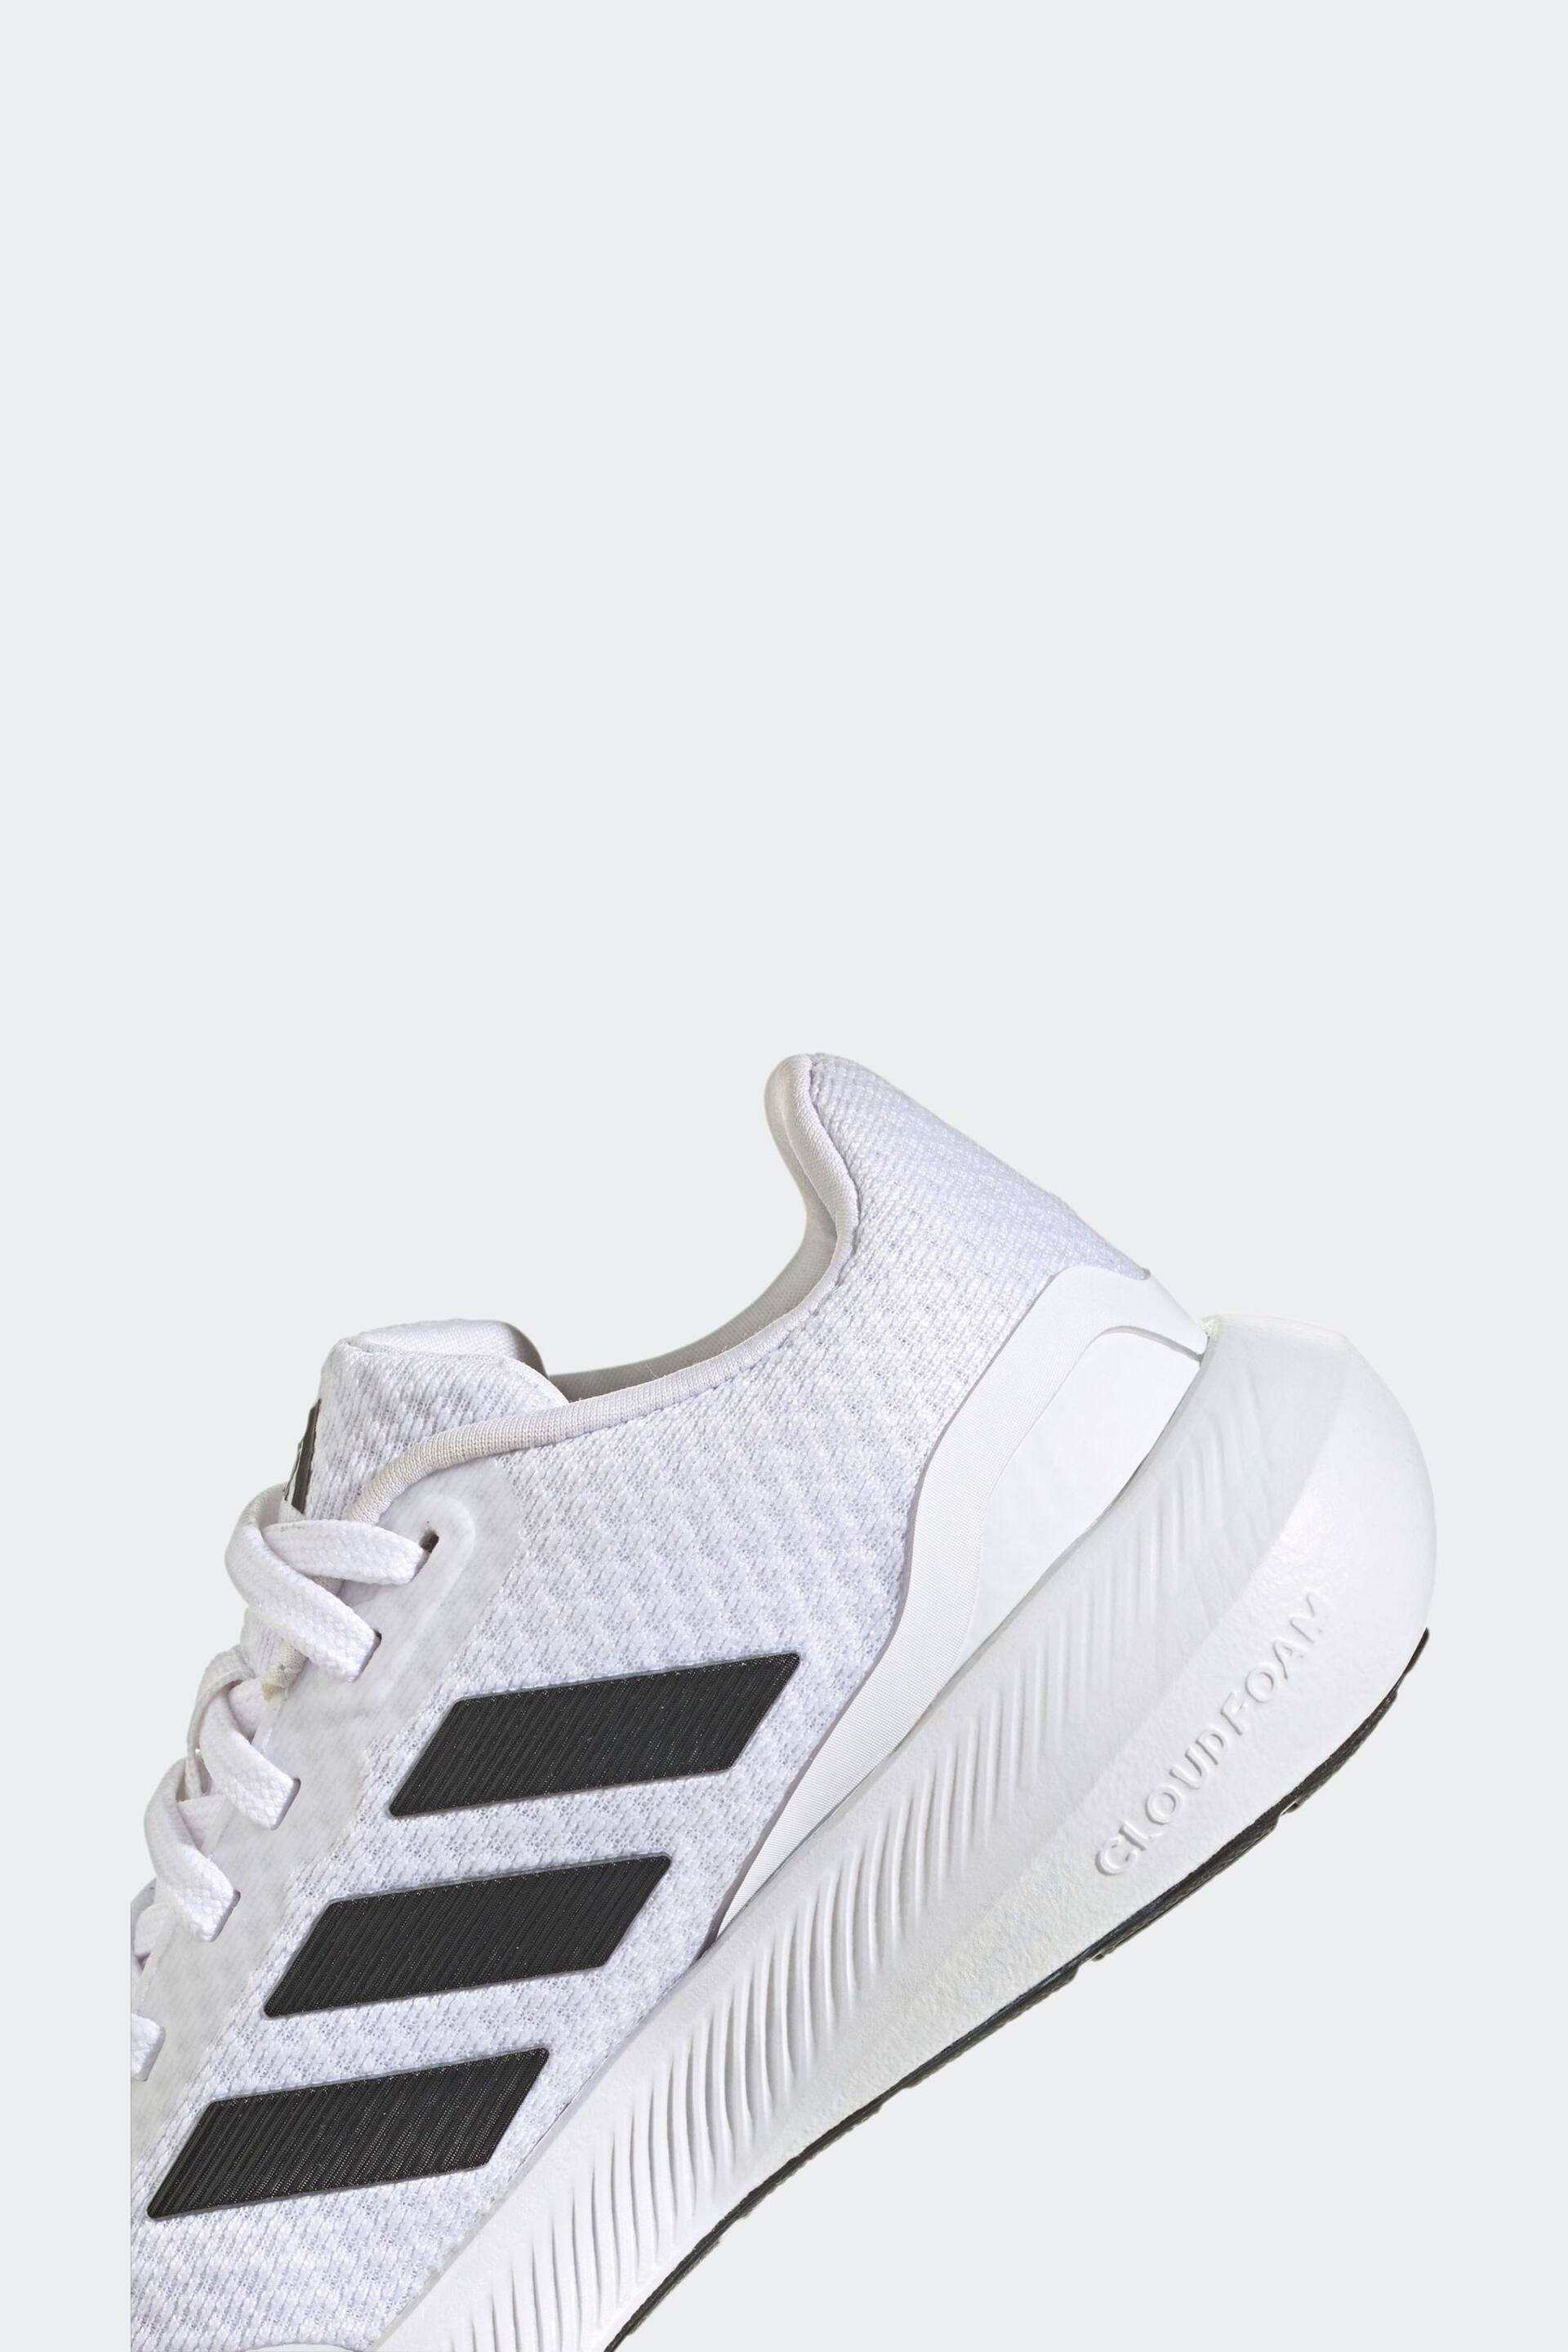 adidas White Runfalcon 3.0 Trainers - Image 8 of 9